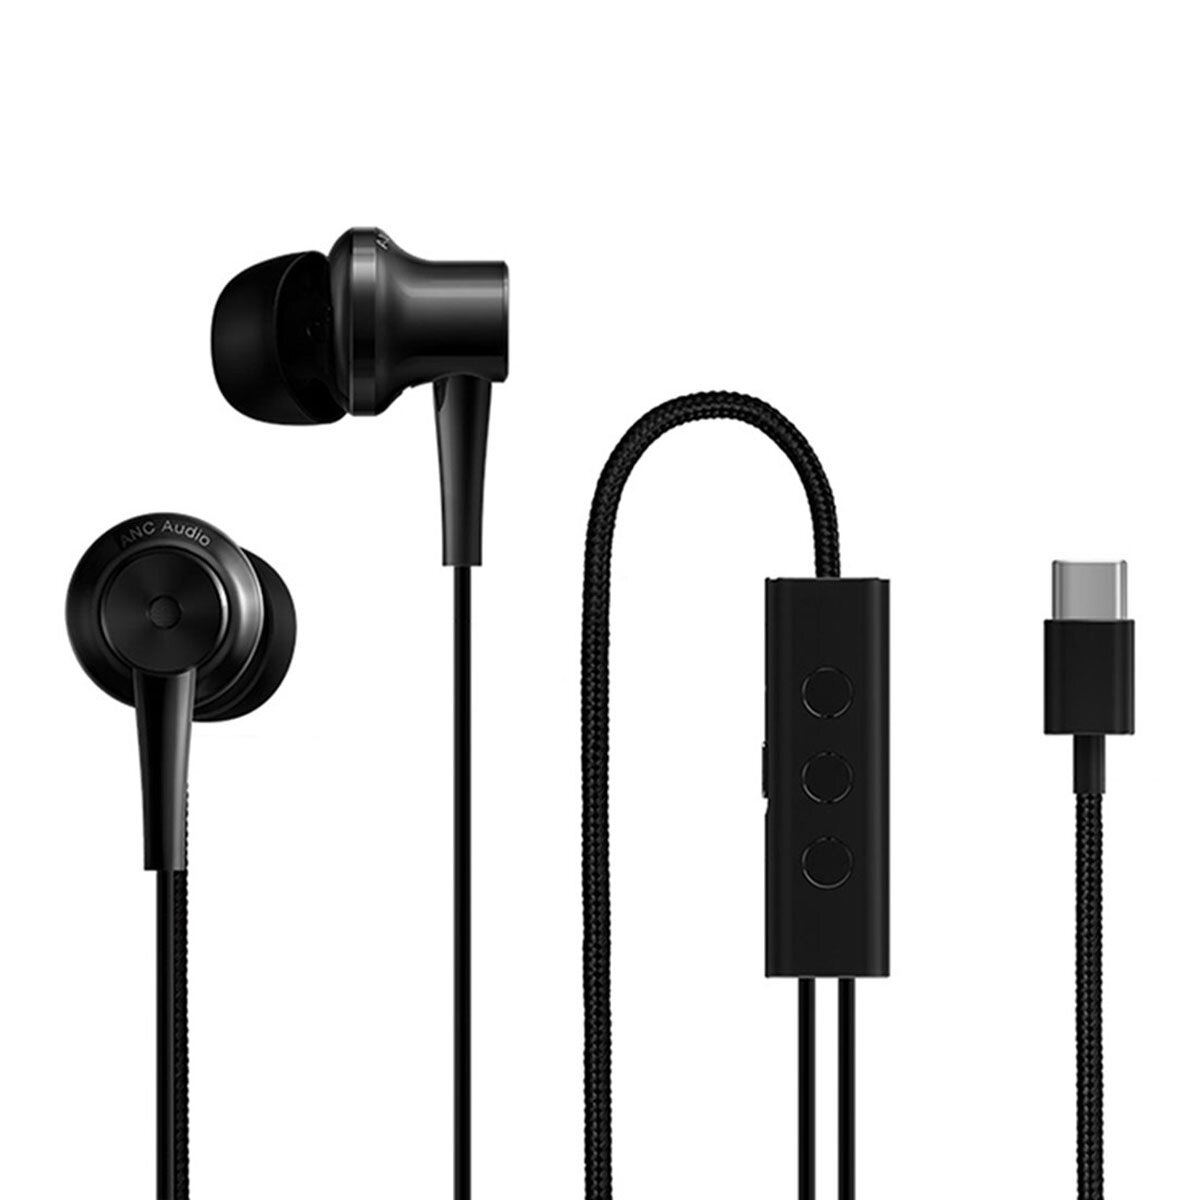 Original xiaomi active noise cancelling earphone usb type-c balanced armature dynamic driver headphone with mic